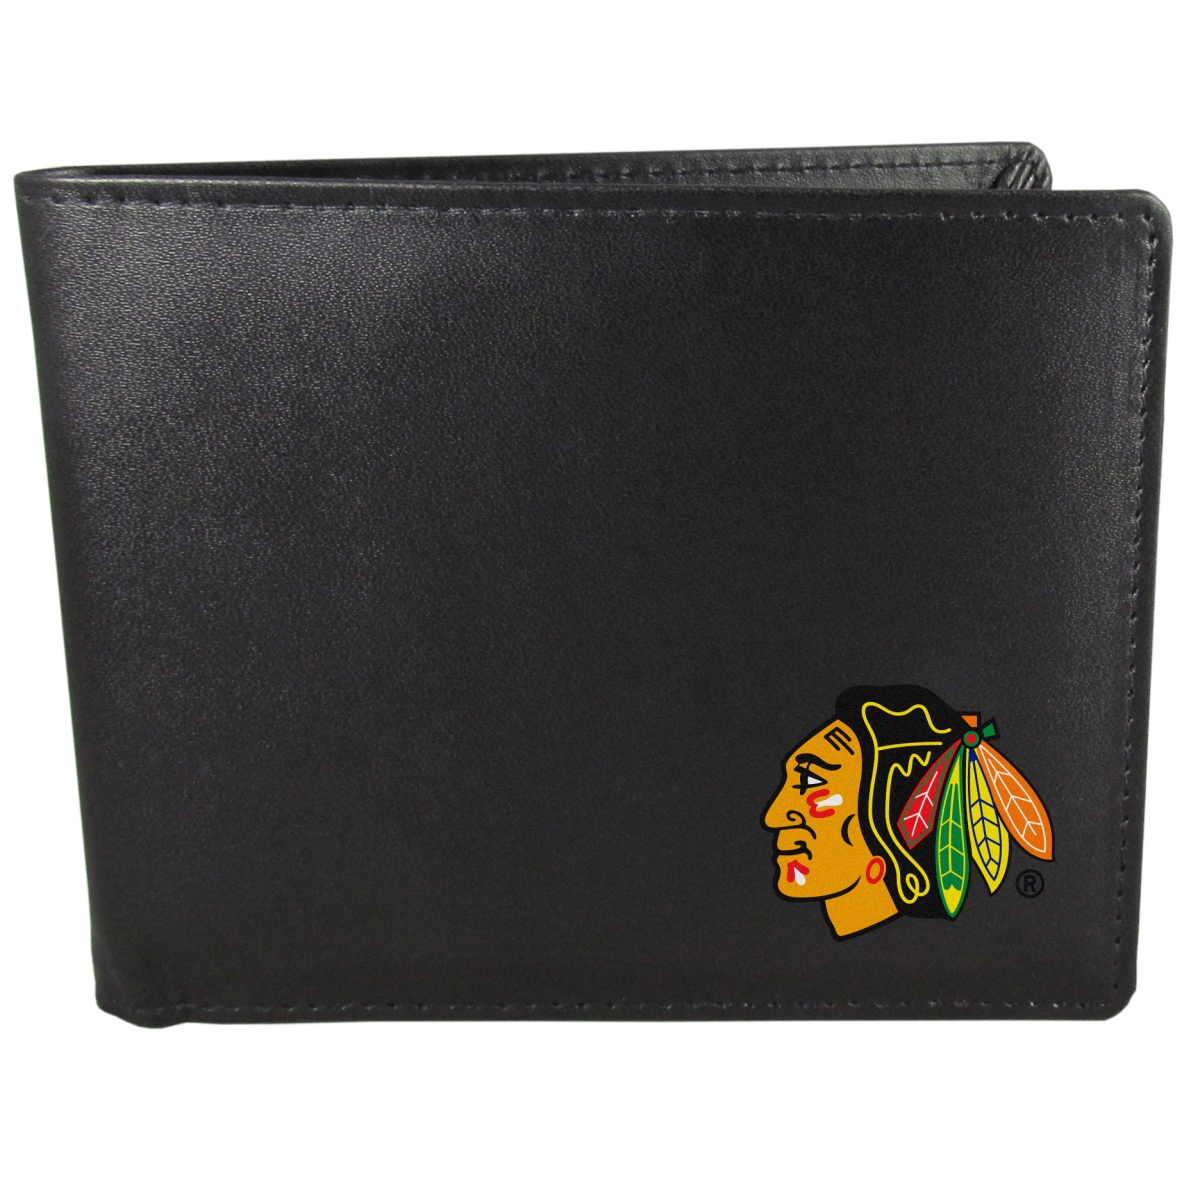 Picture of Siskiyou HBWP10 Male NHL Chicago Blackhawks Bi-fold Wallet - One Size